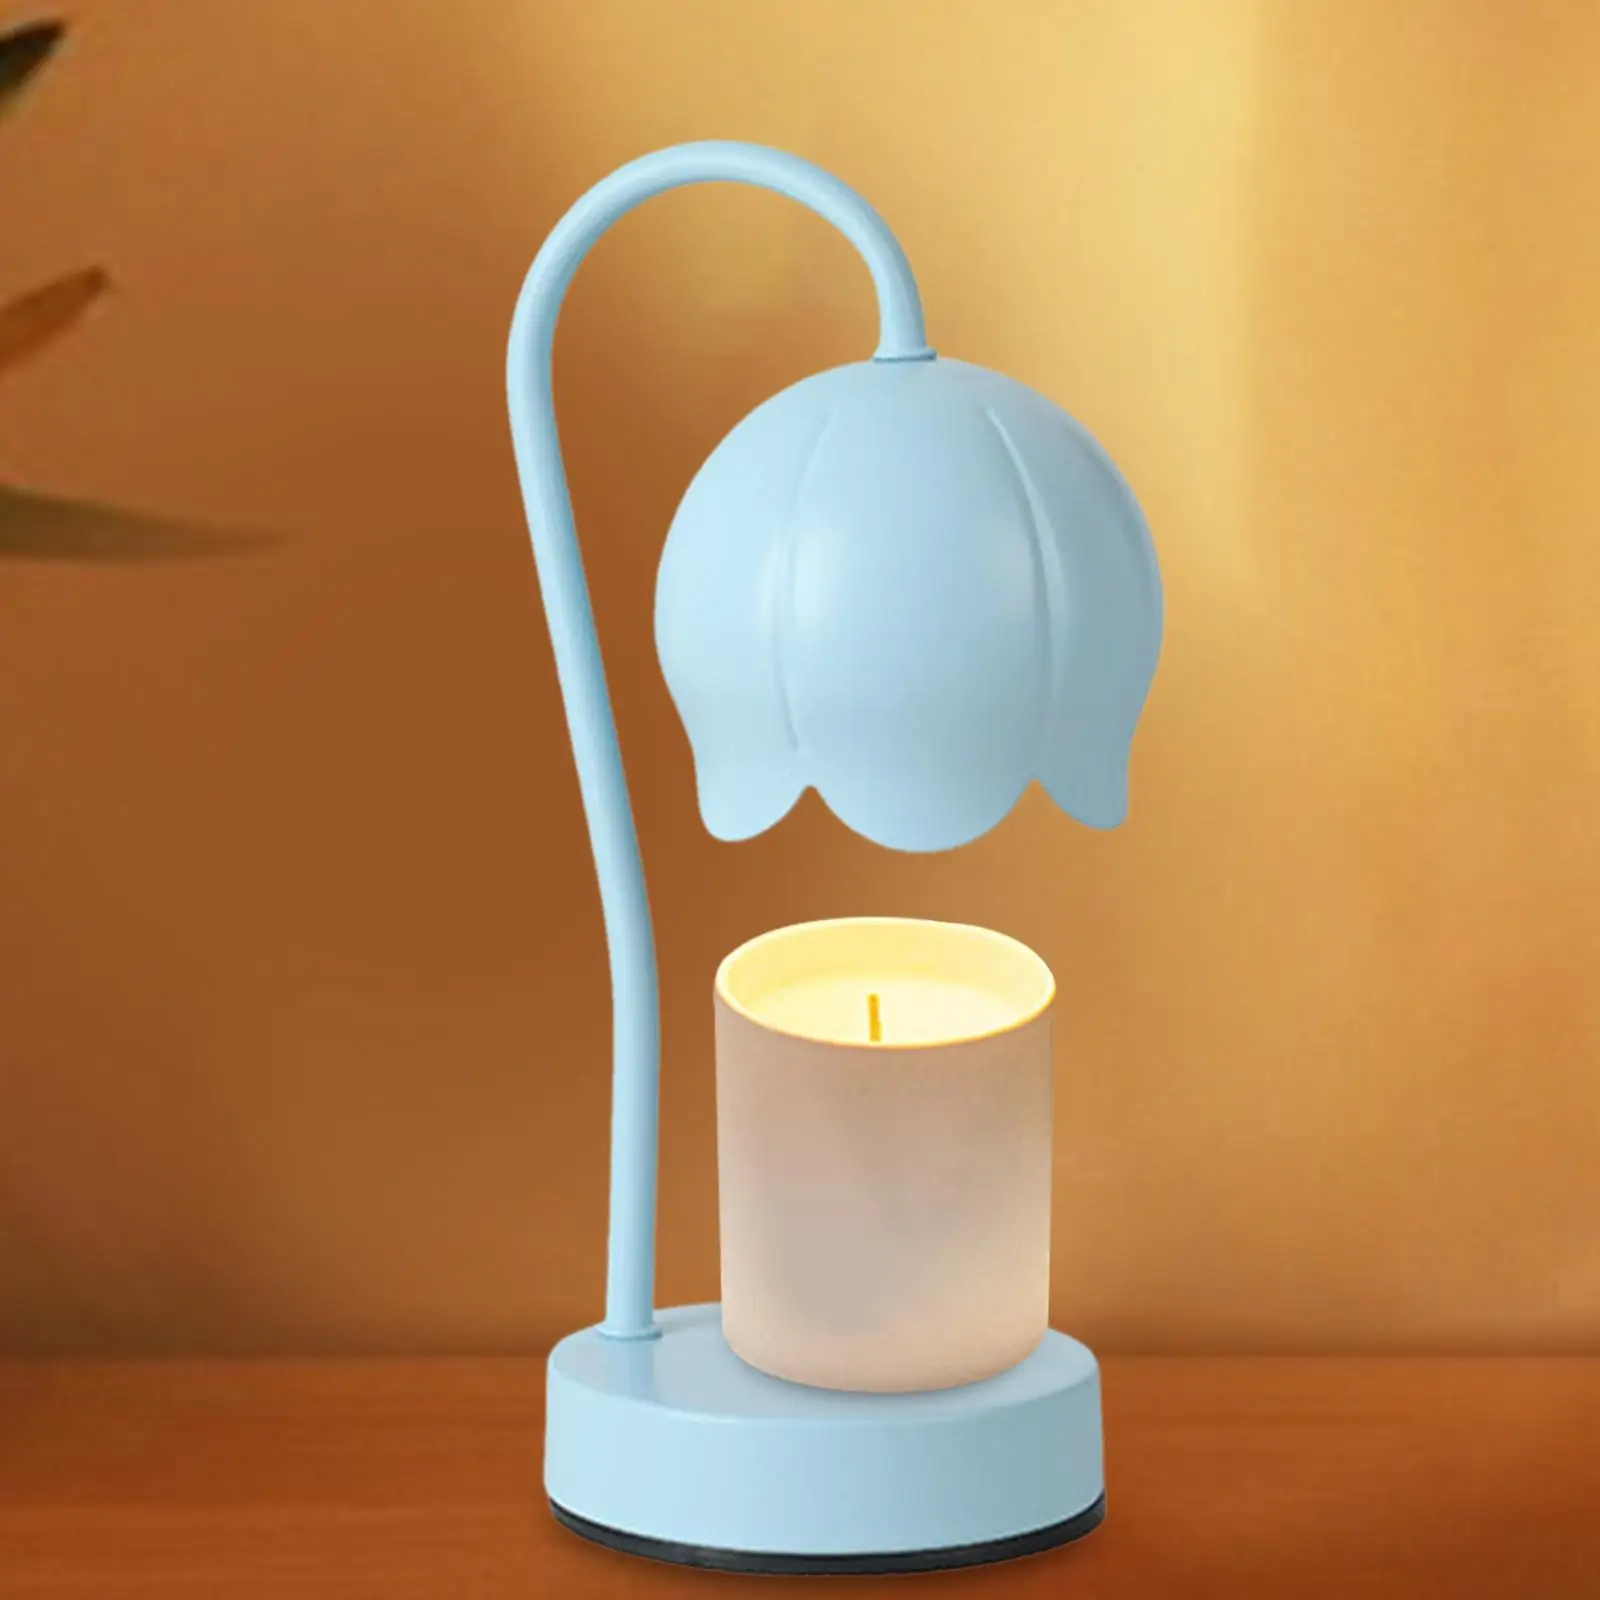 No Flame Candle Warmer Lamp Dimmable Metal Ornament Desk Light for Scented Candles with 2 Bulbs Candle Melter for Hotel Desk